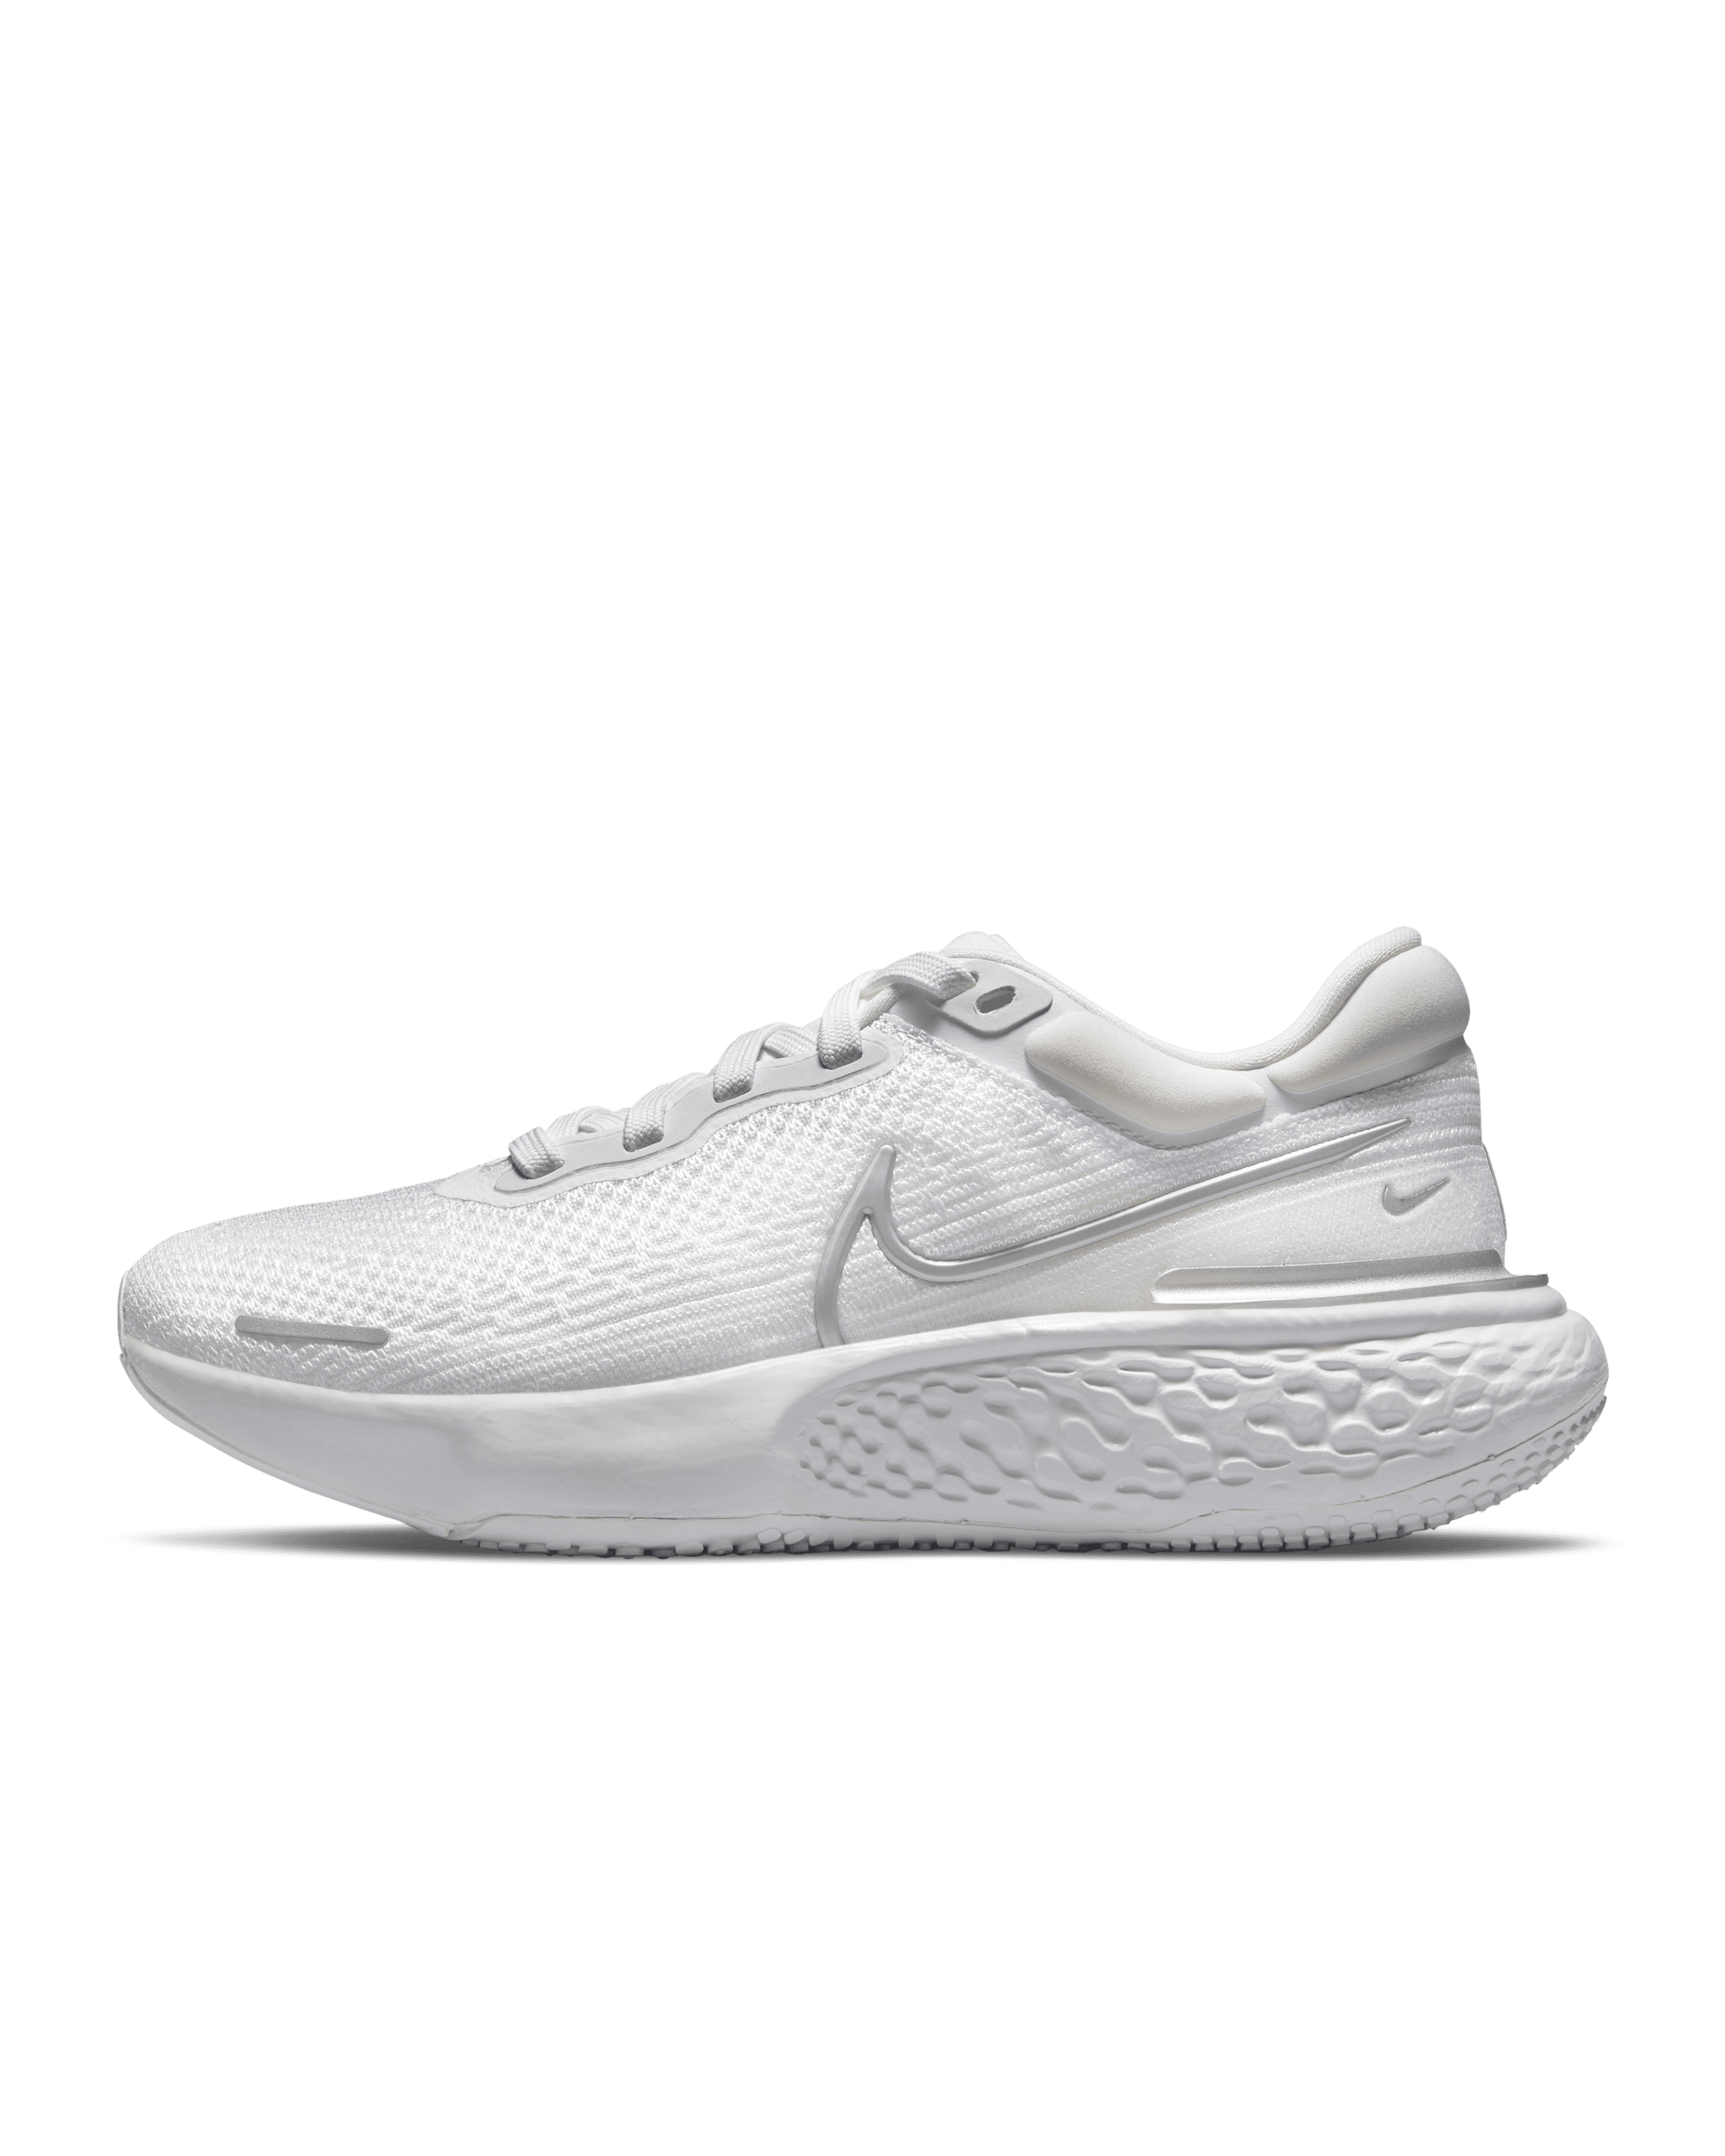 nike shoes with good heel support